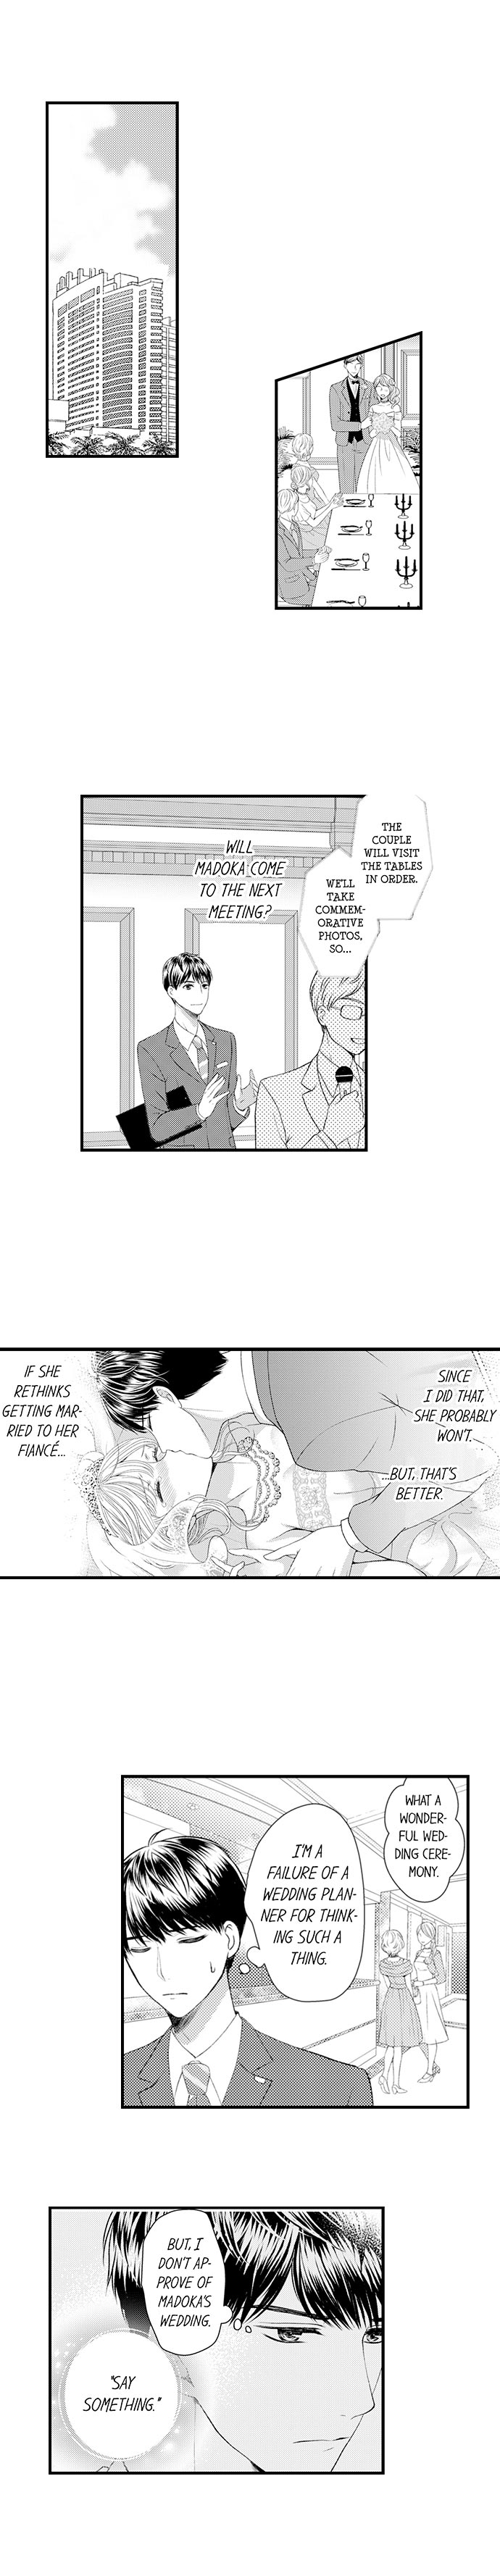 Cheating in a One-Sided Relationship - Chapter 9 Page 2